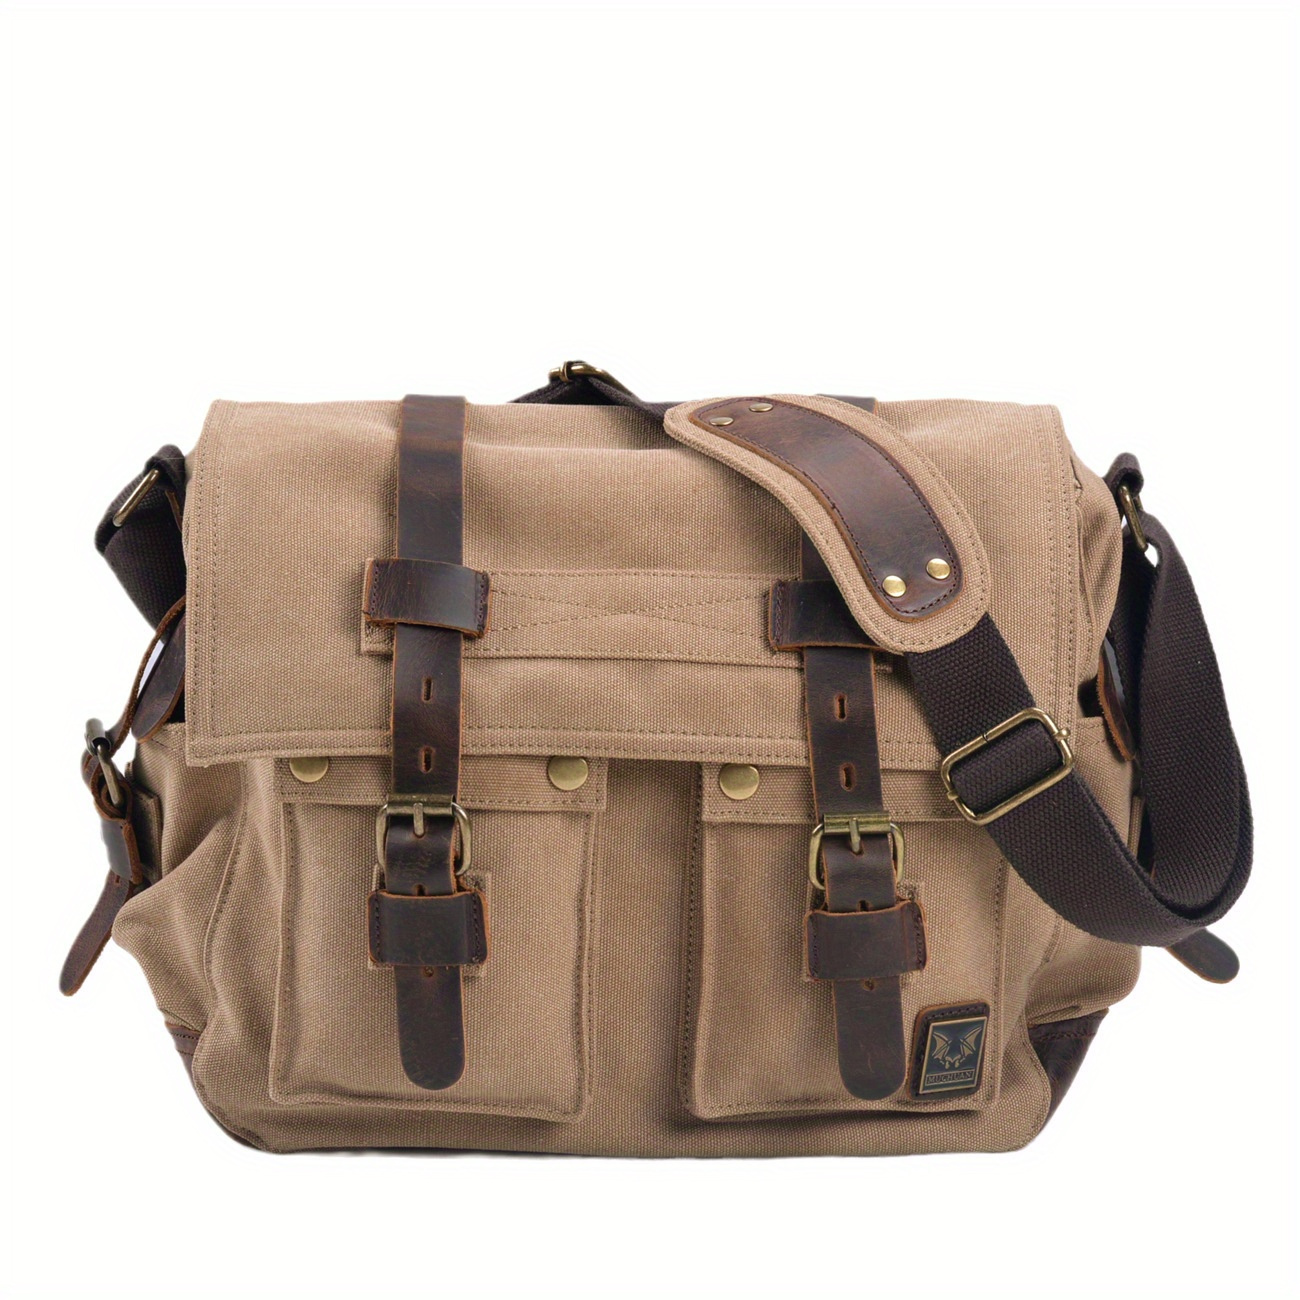 Leather or Canvas Vintage Messenger Bags & Briefcases